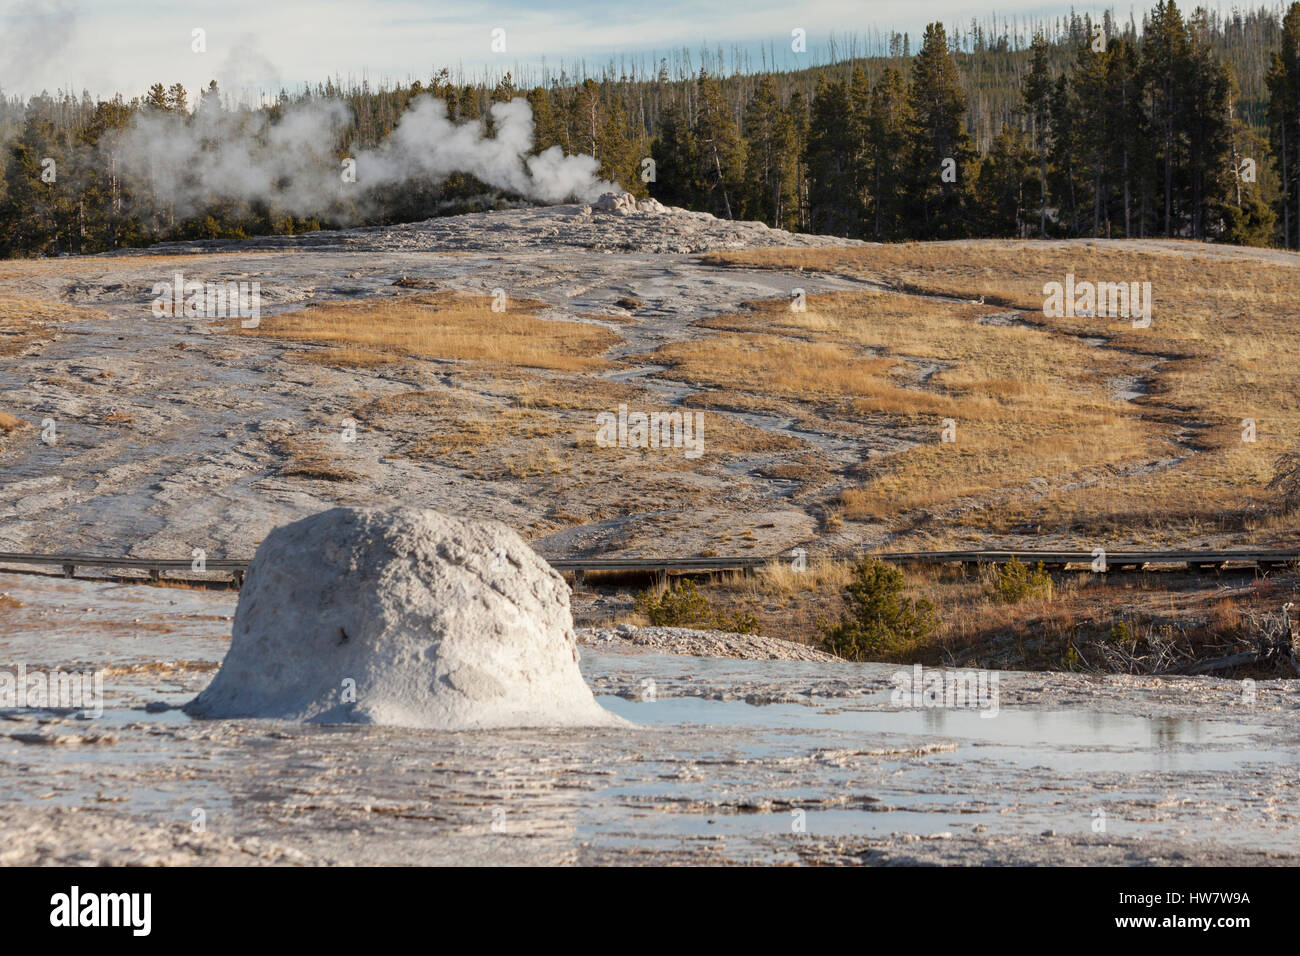 Old Faithful Geyser et Ruche , Parc National de Yellowstone, Wyoming. Banque D'Images